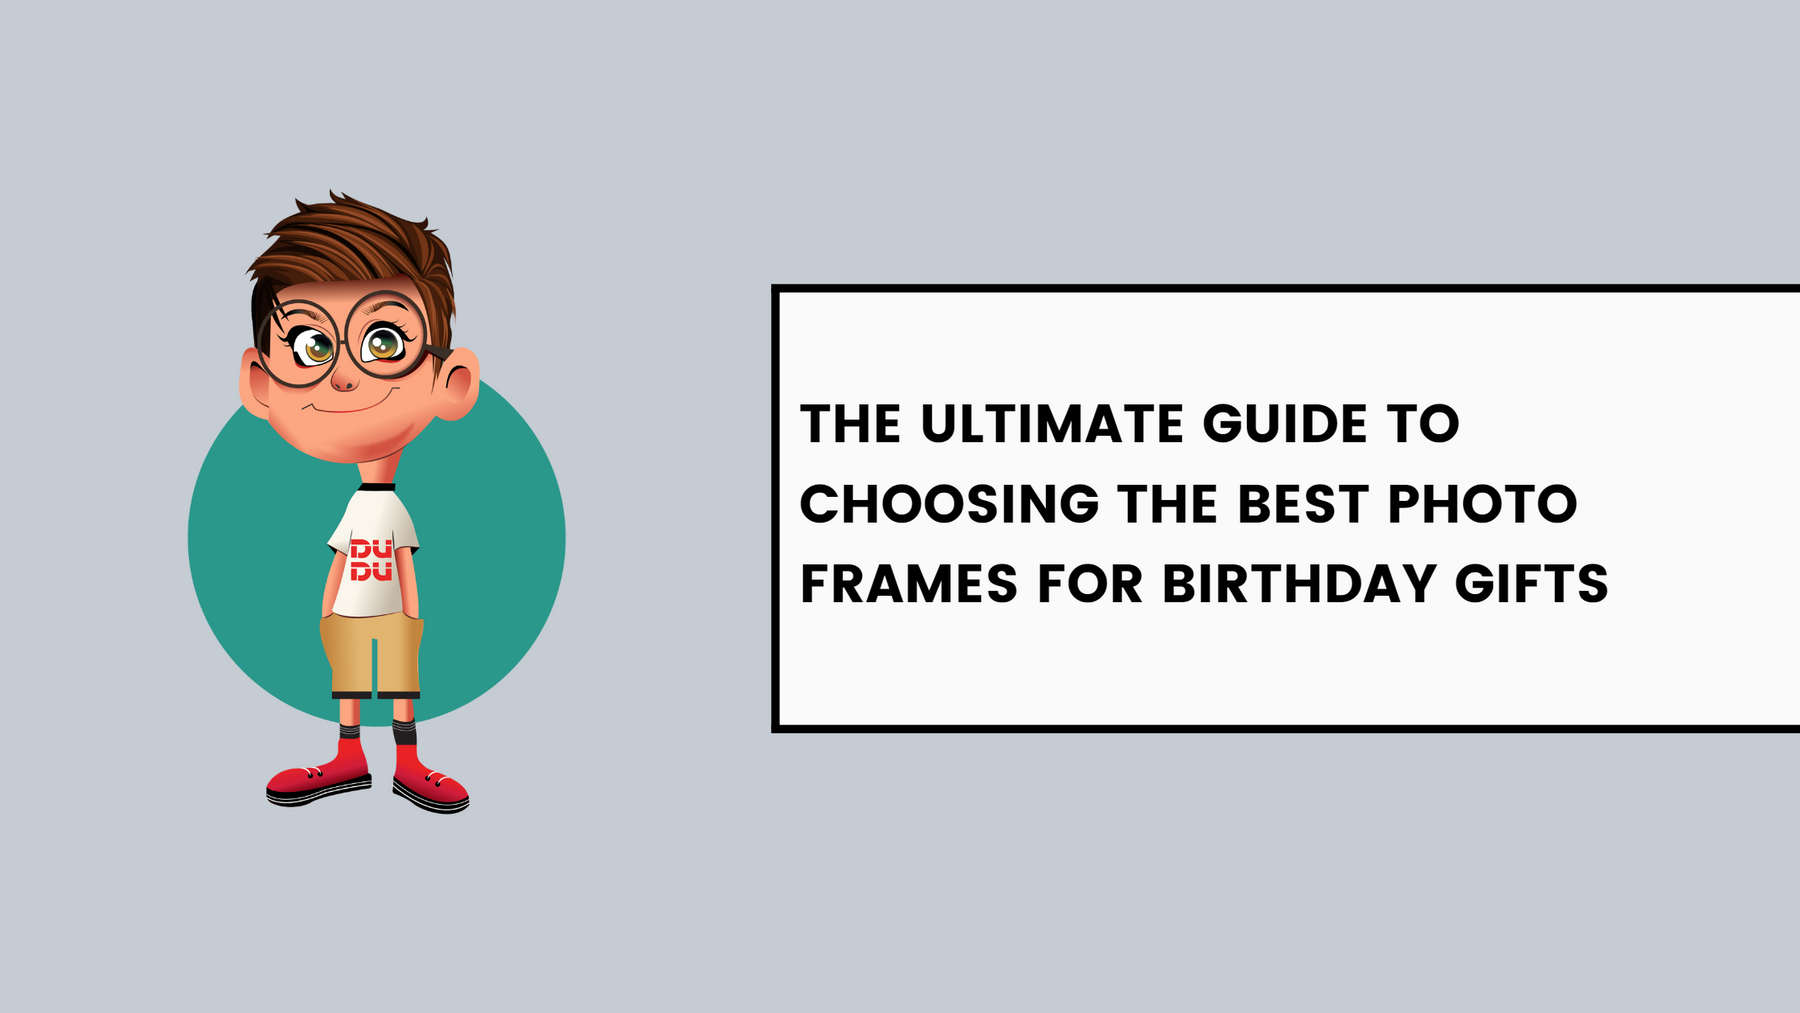 The Ultimate Guide to Choosing the Best Photo Frames for Birthday Gifts